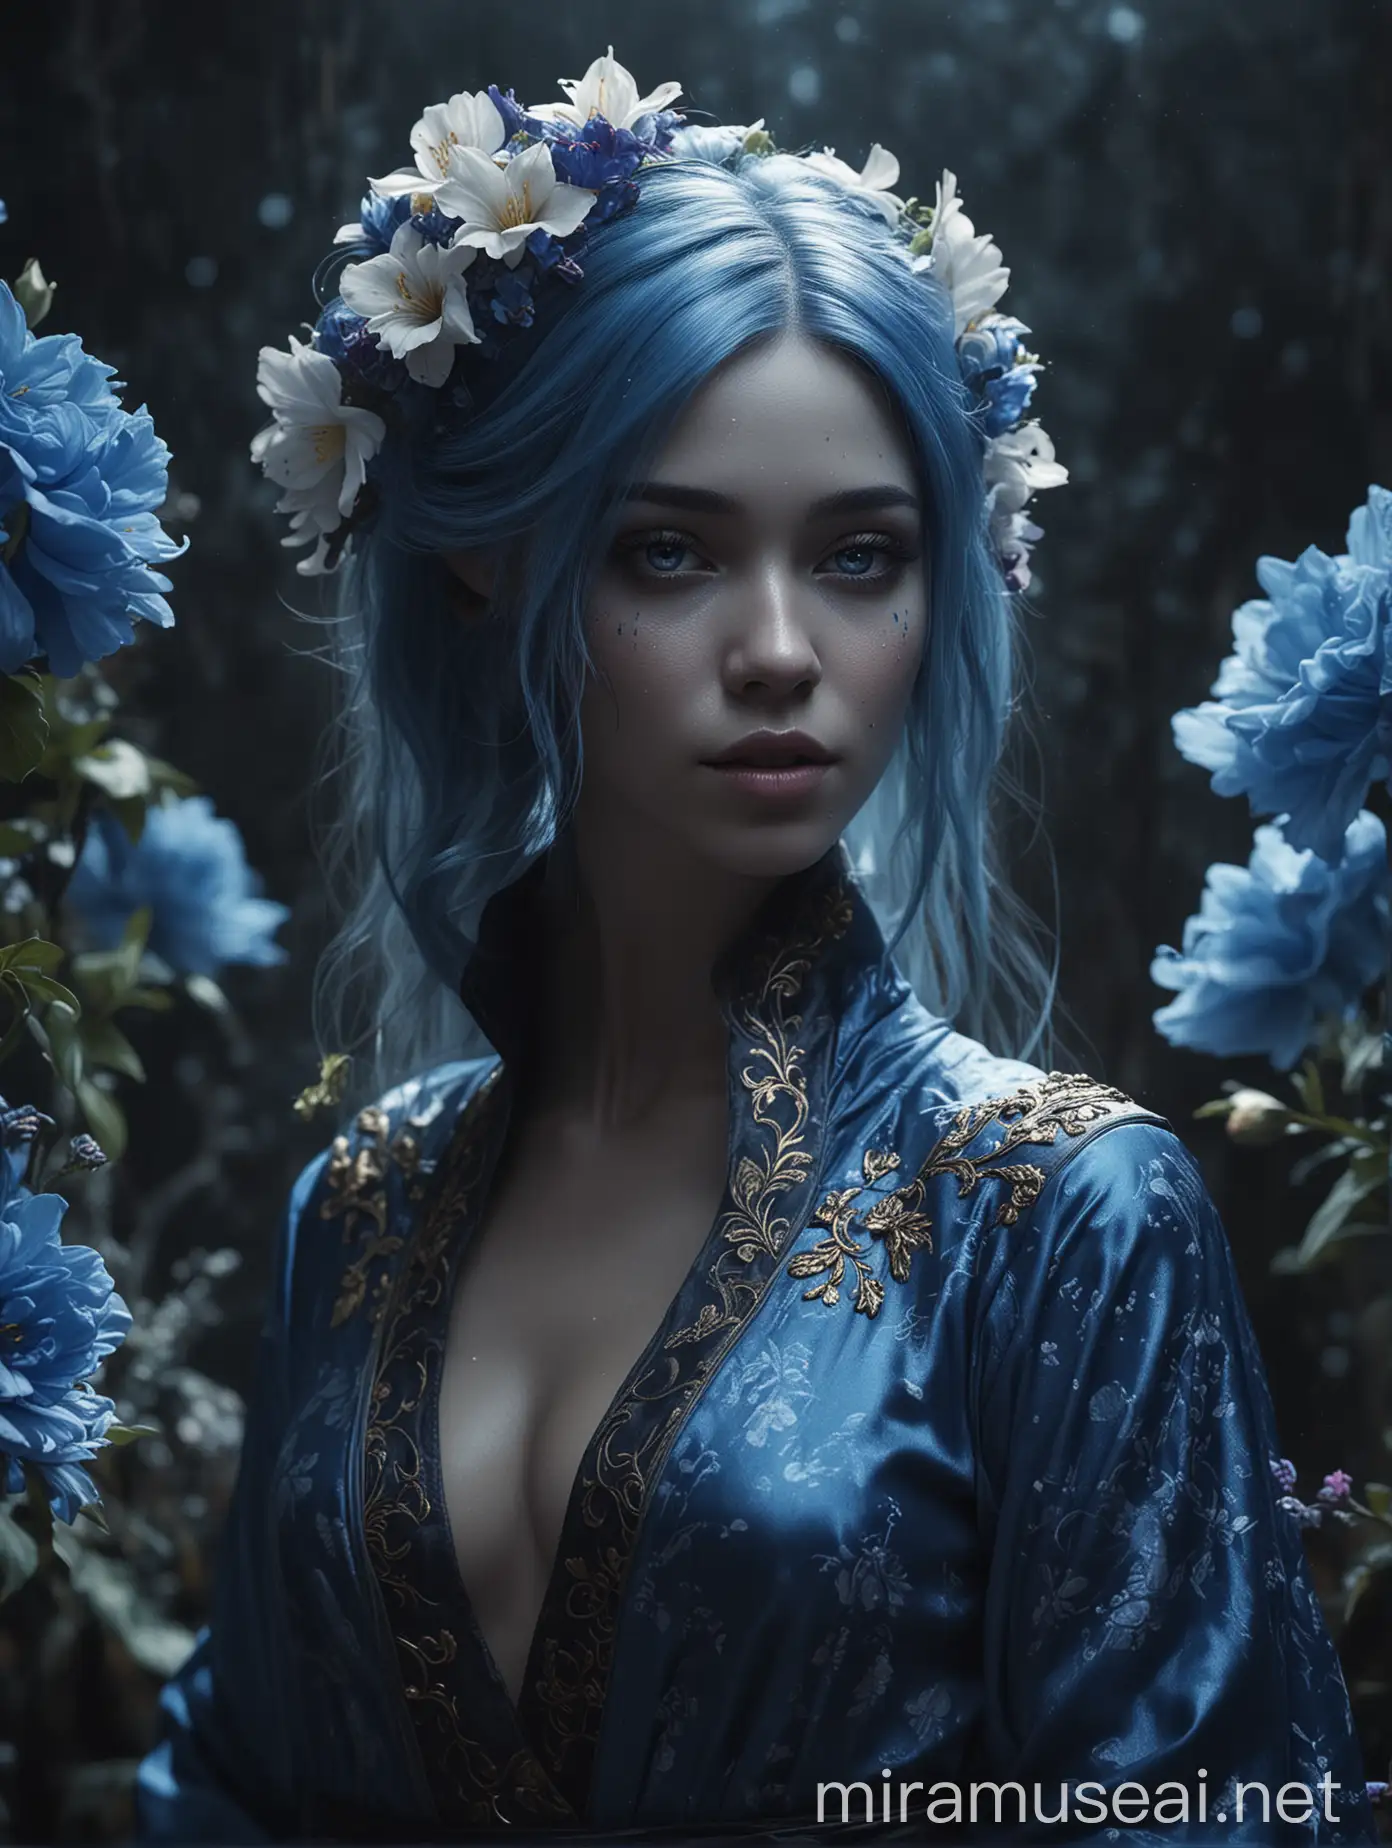 Regal Galactic Princess Portrait of a BlueSkinned Andromedan Female in Epic Cinematic Setting with Flowing Robes and Flowers